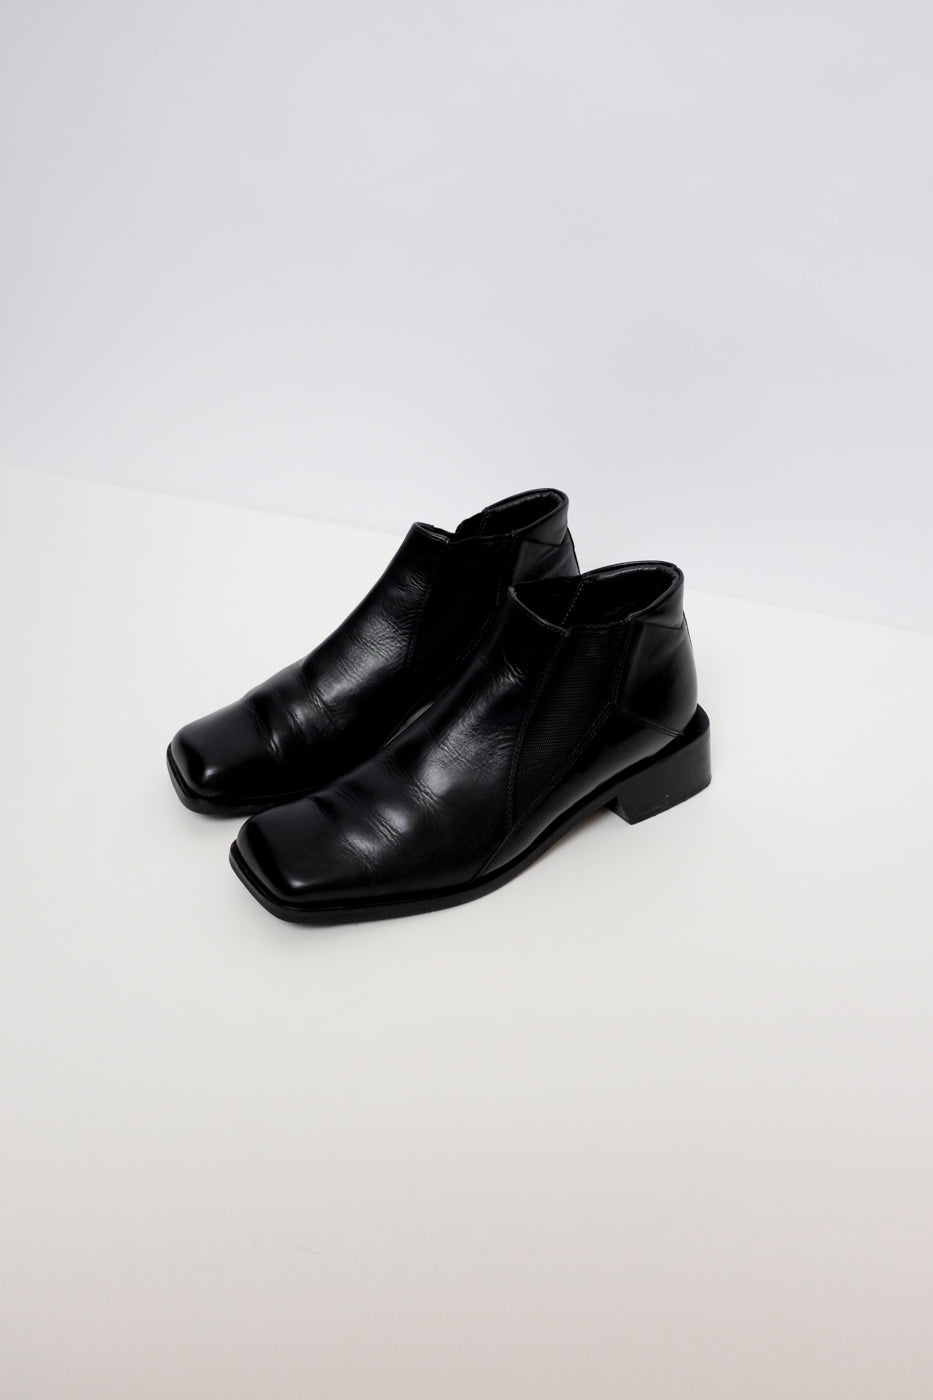 0010_SQUARE TOE BLACK 37 LEATHER CHELSEA BOOTS